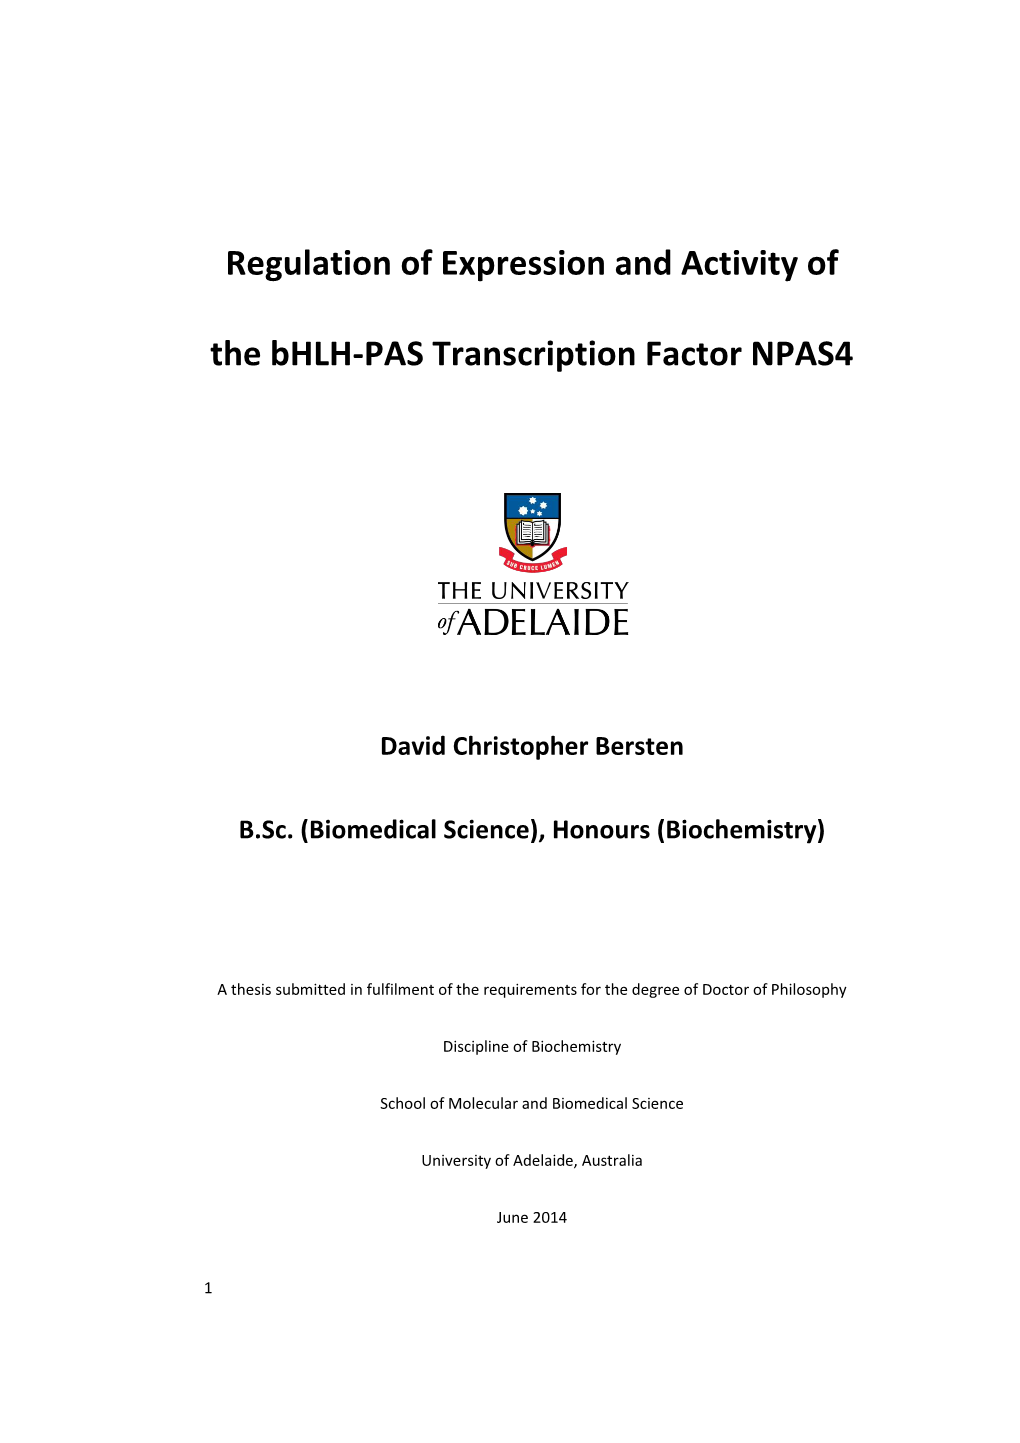 Regulation of Expression and Activity of the Bhlh-PAS Transcription